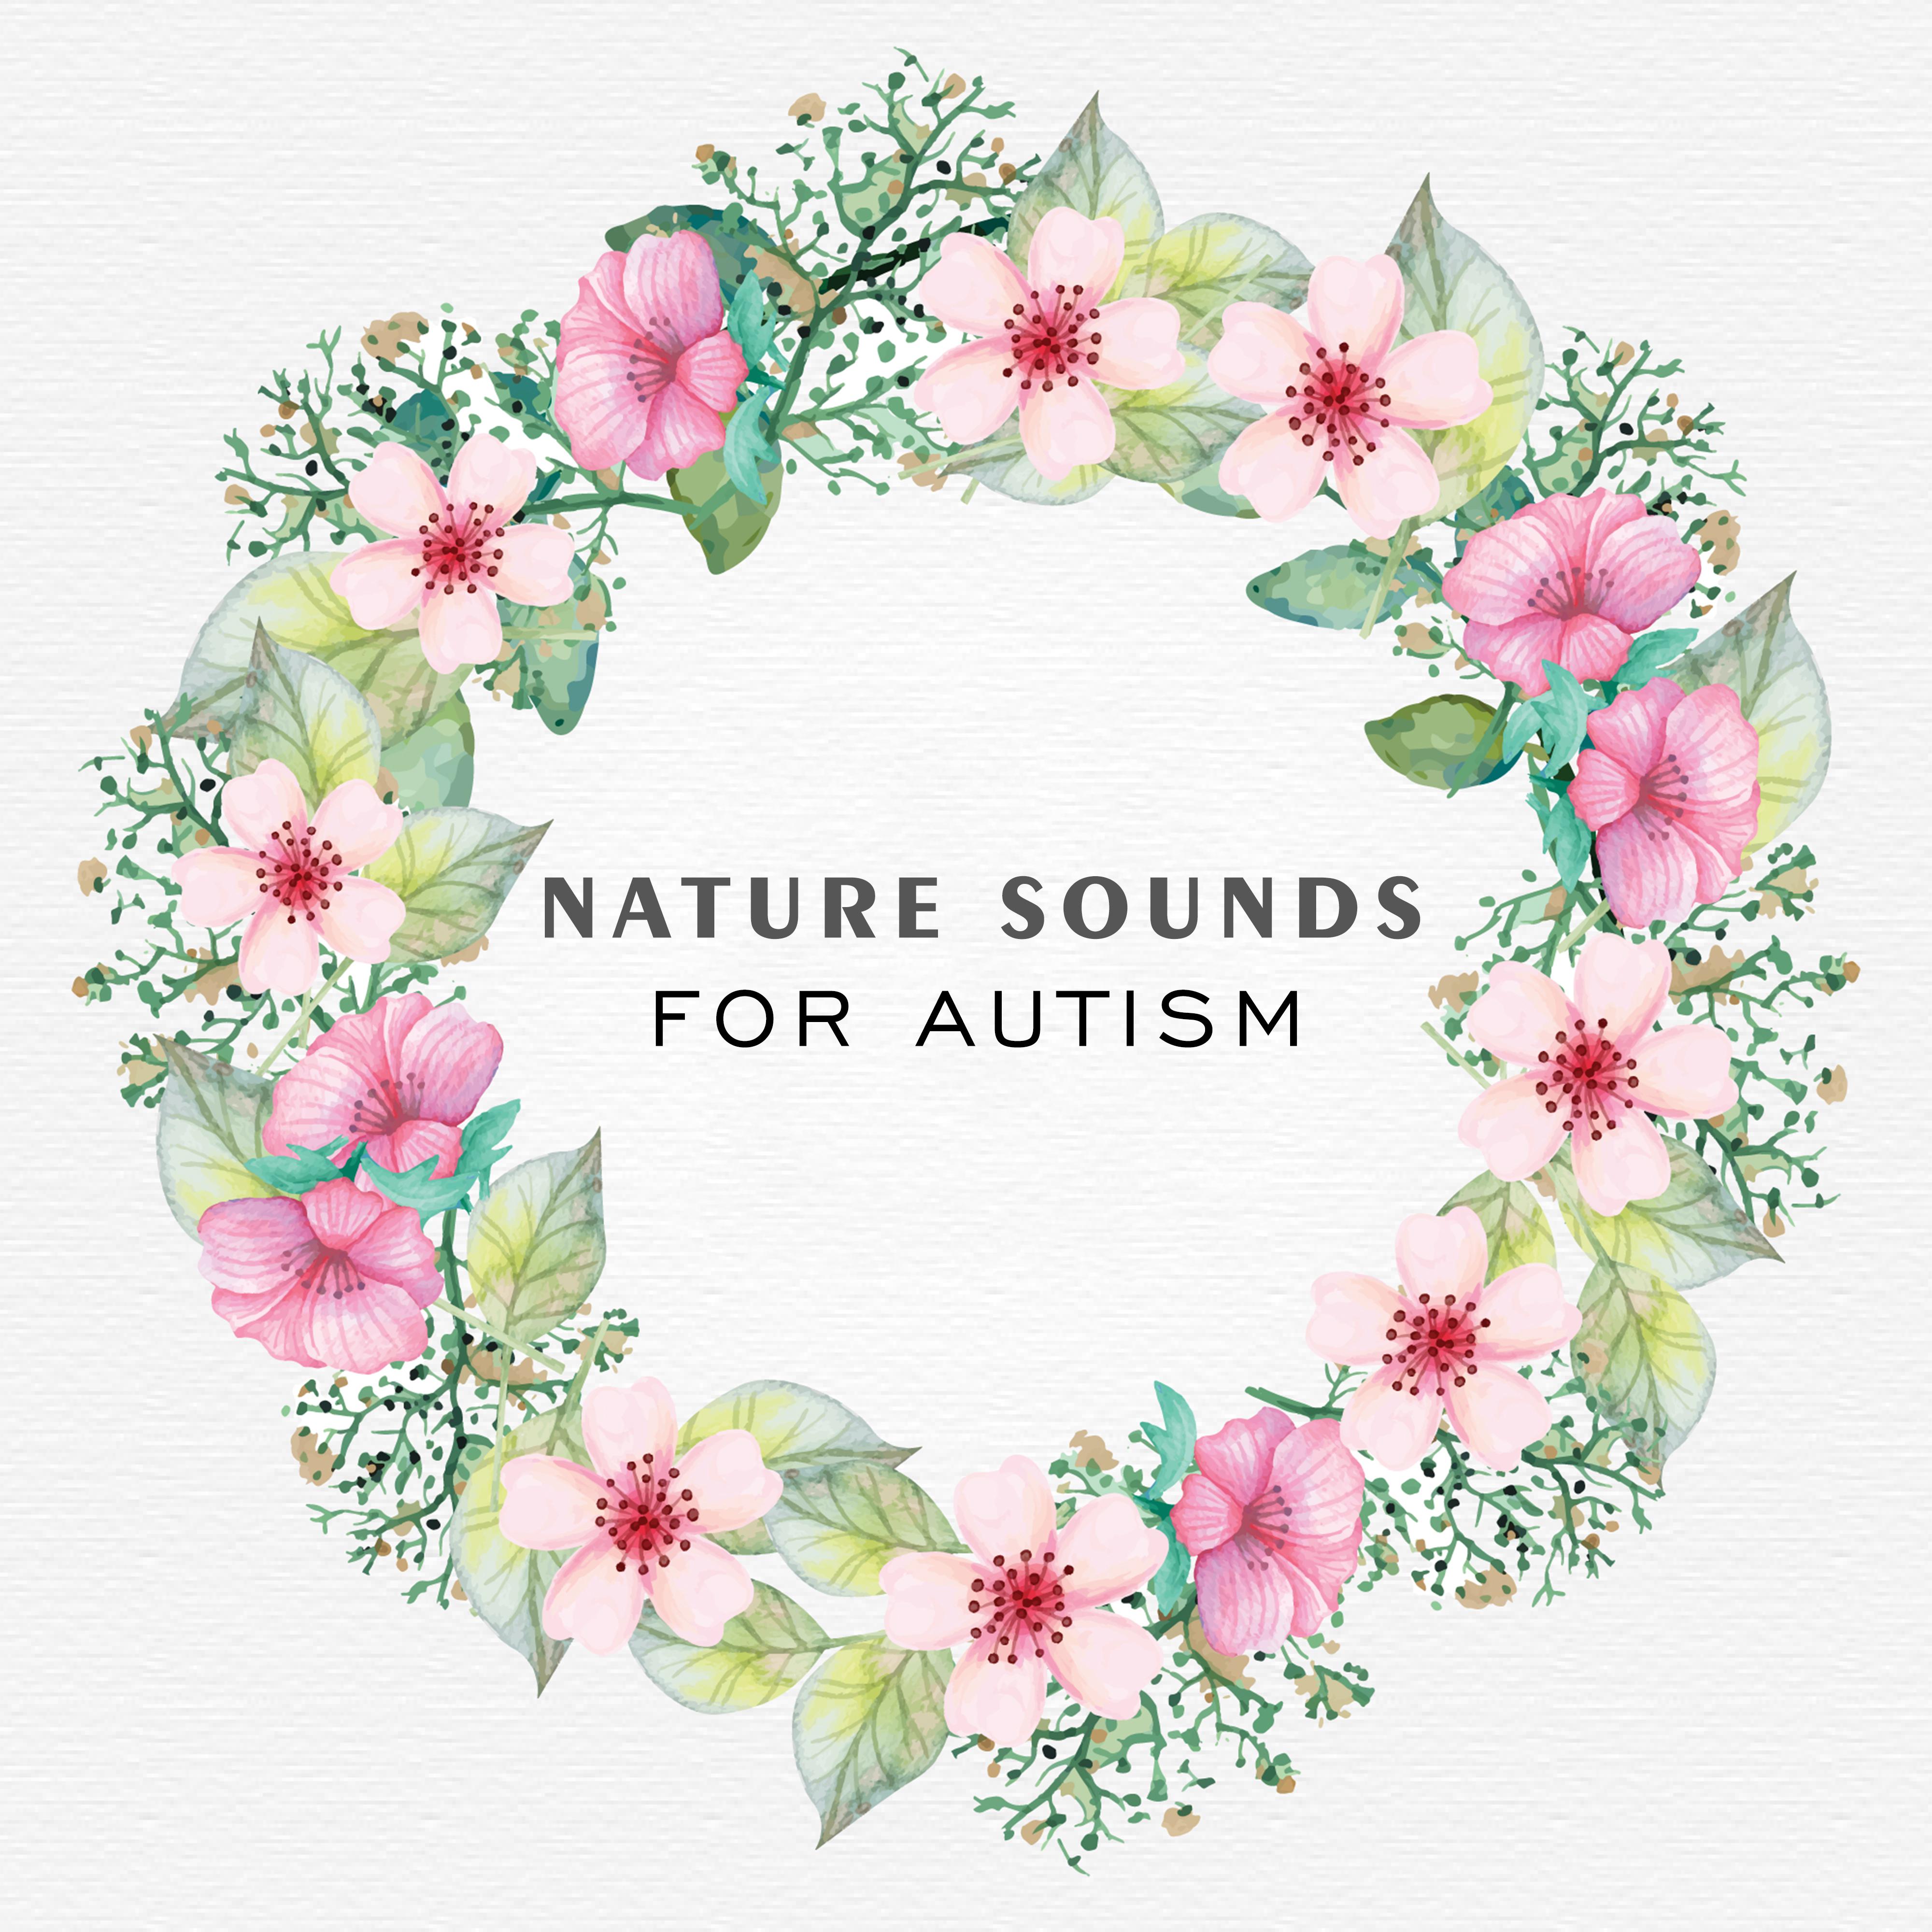 Nature Sounds for Autism